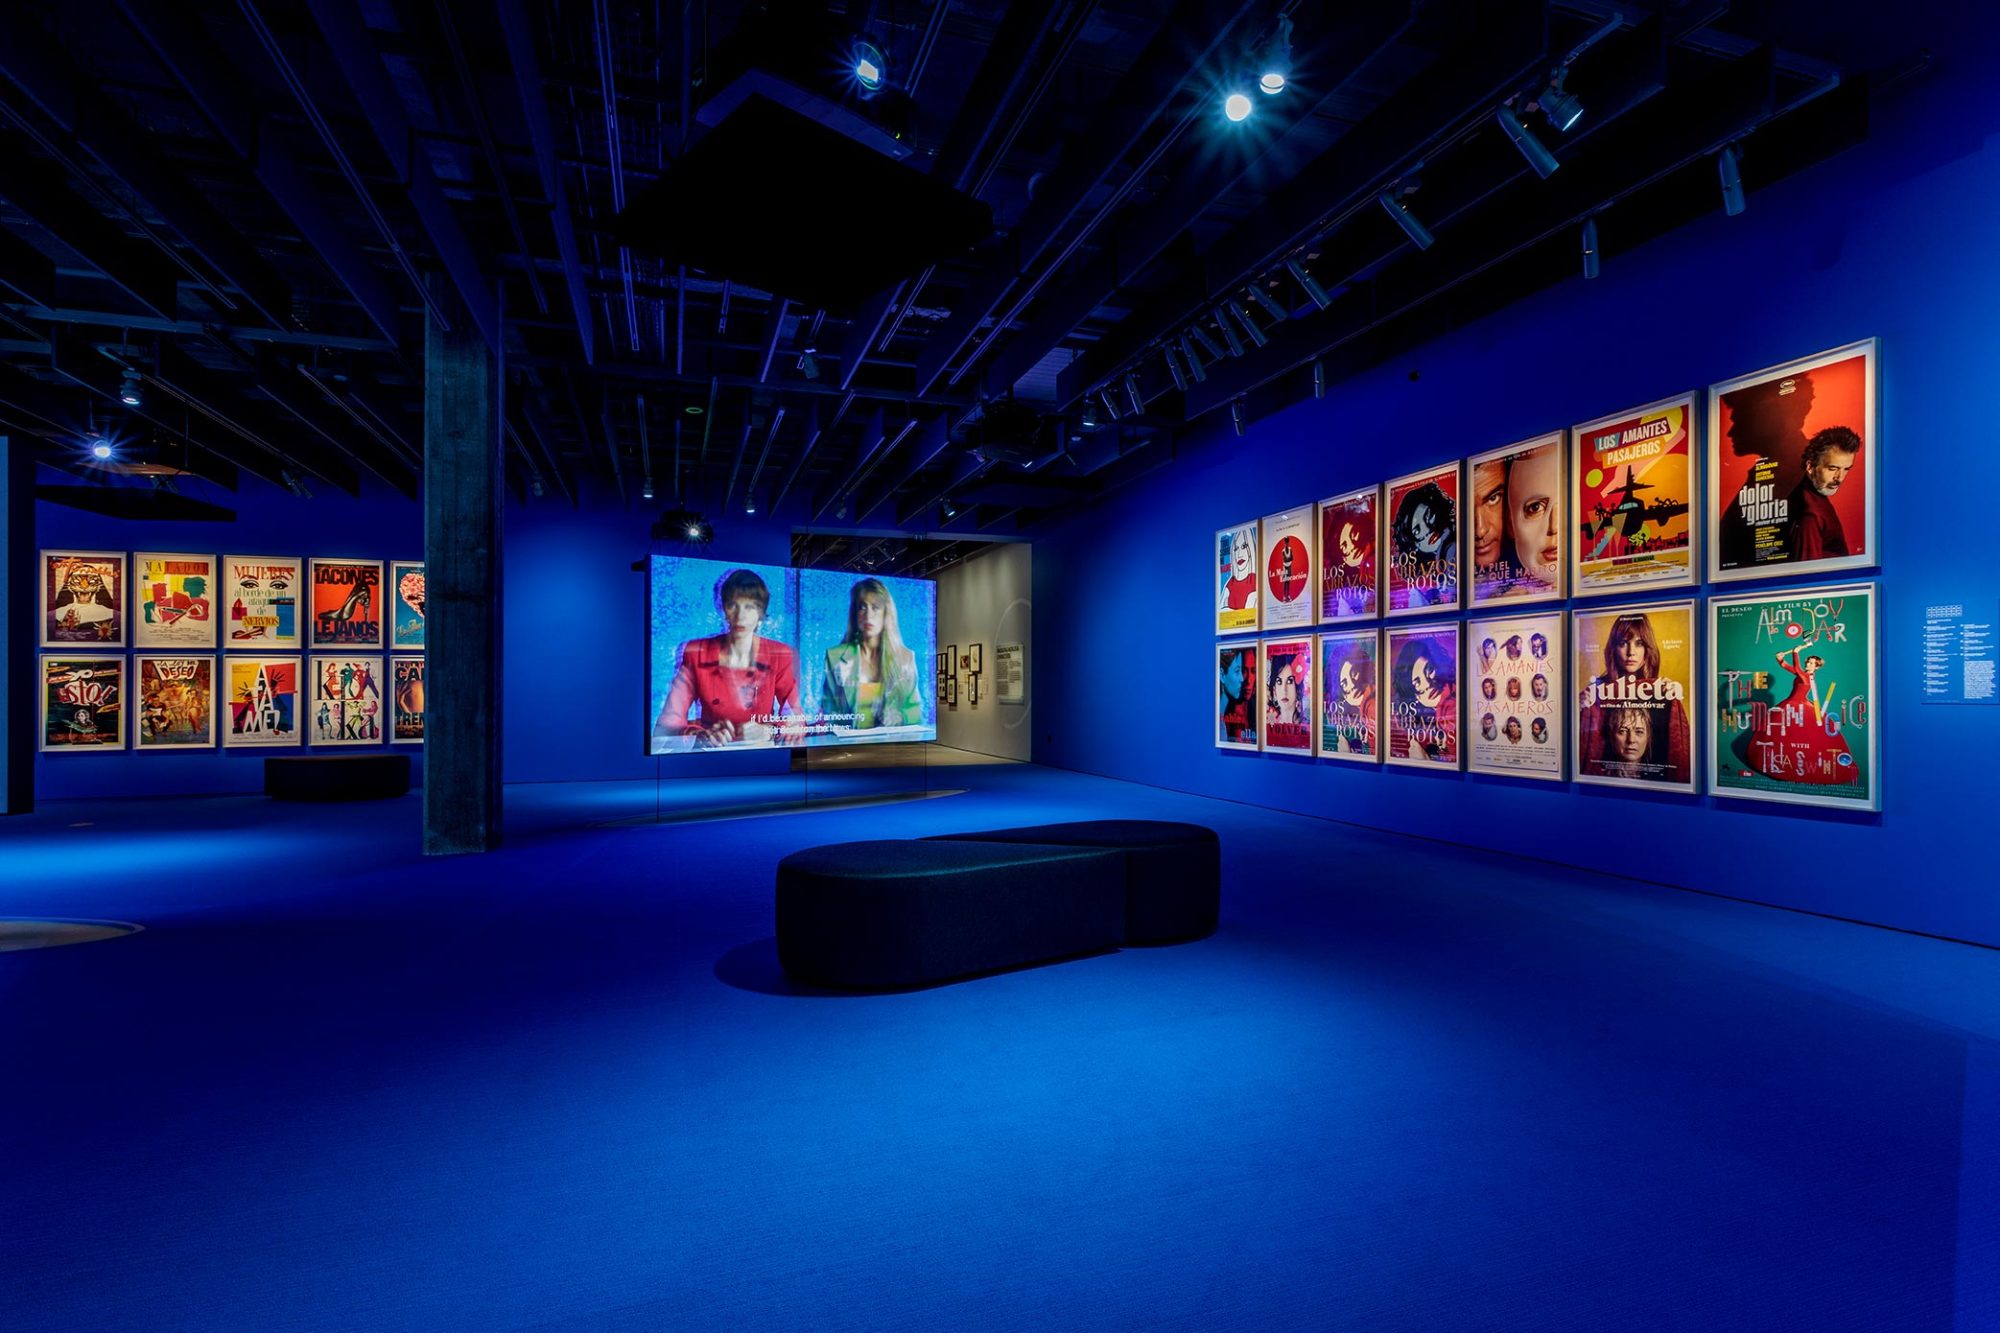 Installation: Pedro Almodóvar, Stories of Cinema 3, Academy Museum of Motion Pictures. Photo by Joshua White, JWPictures/©Academy Museum Foundation